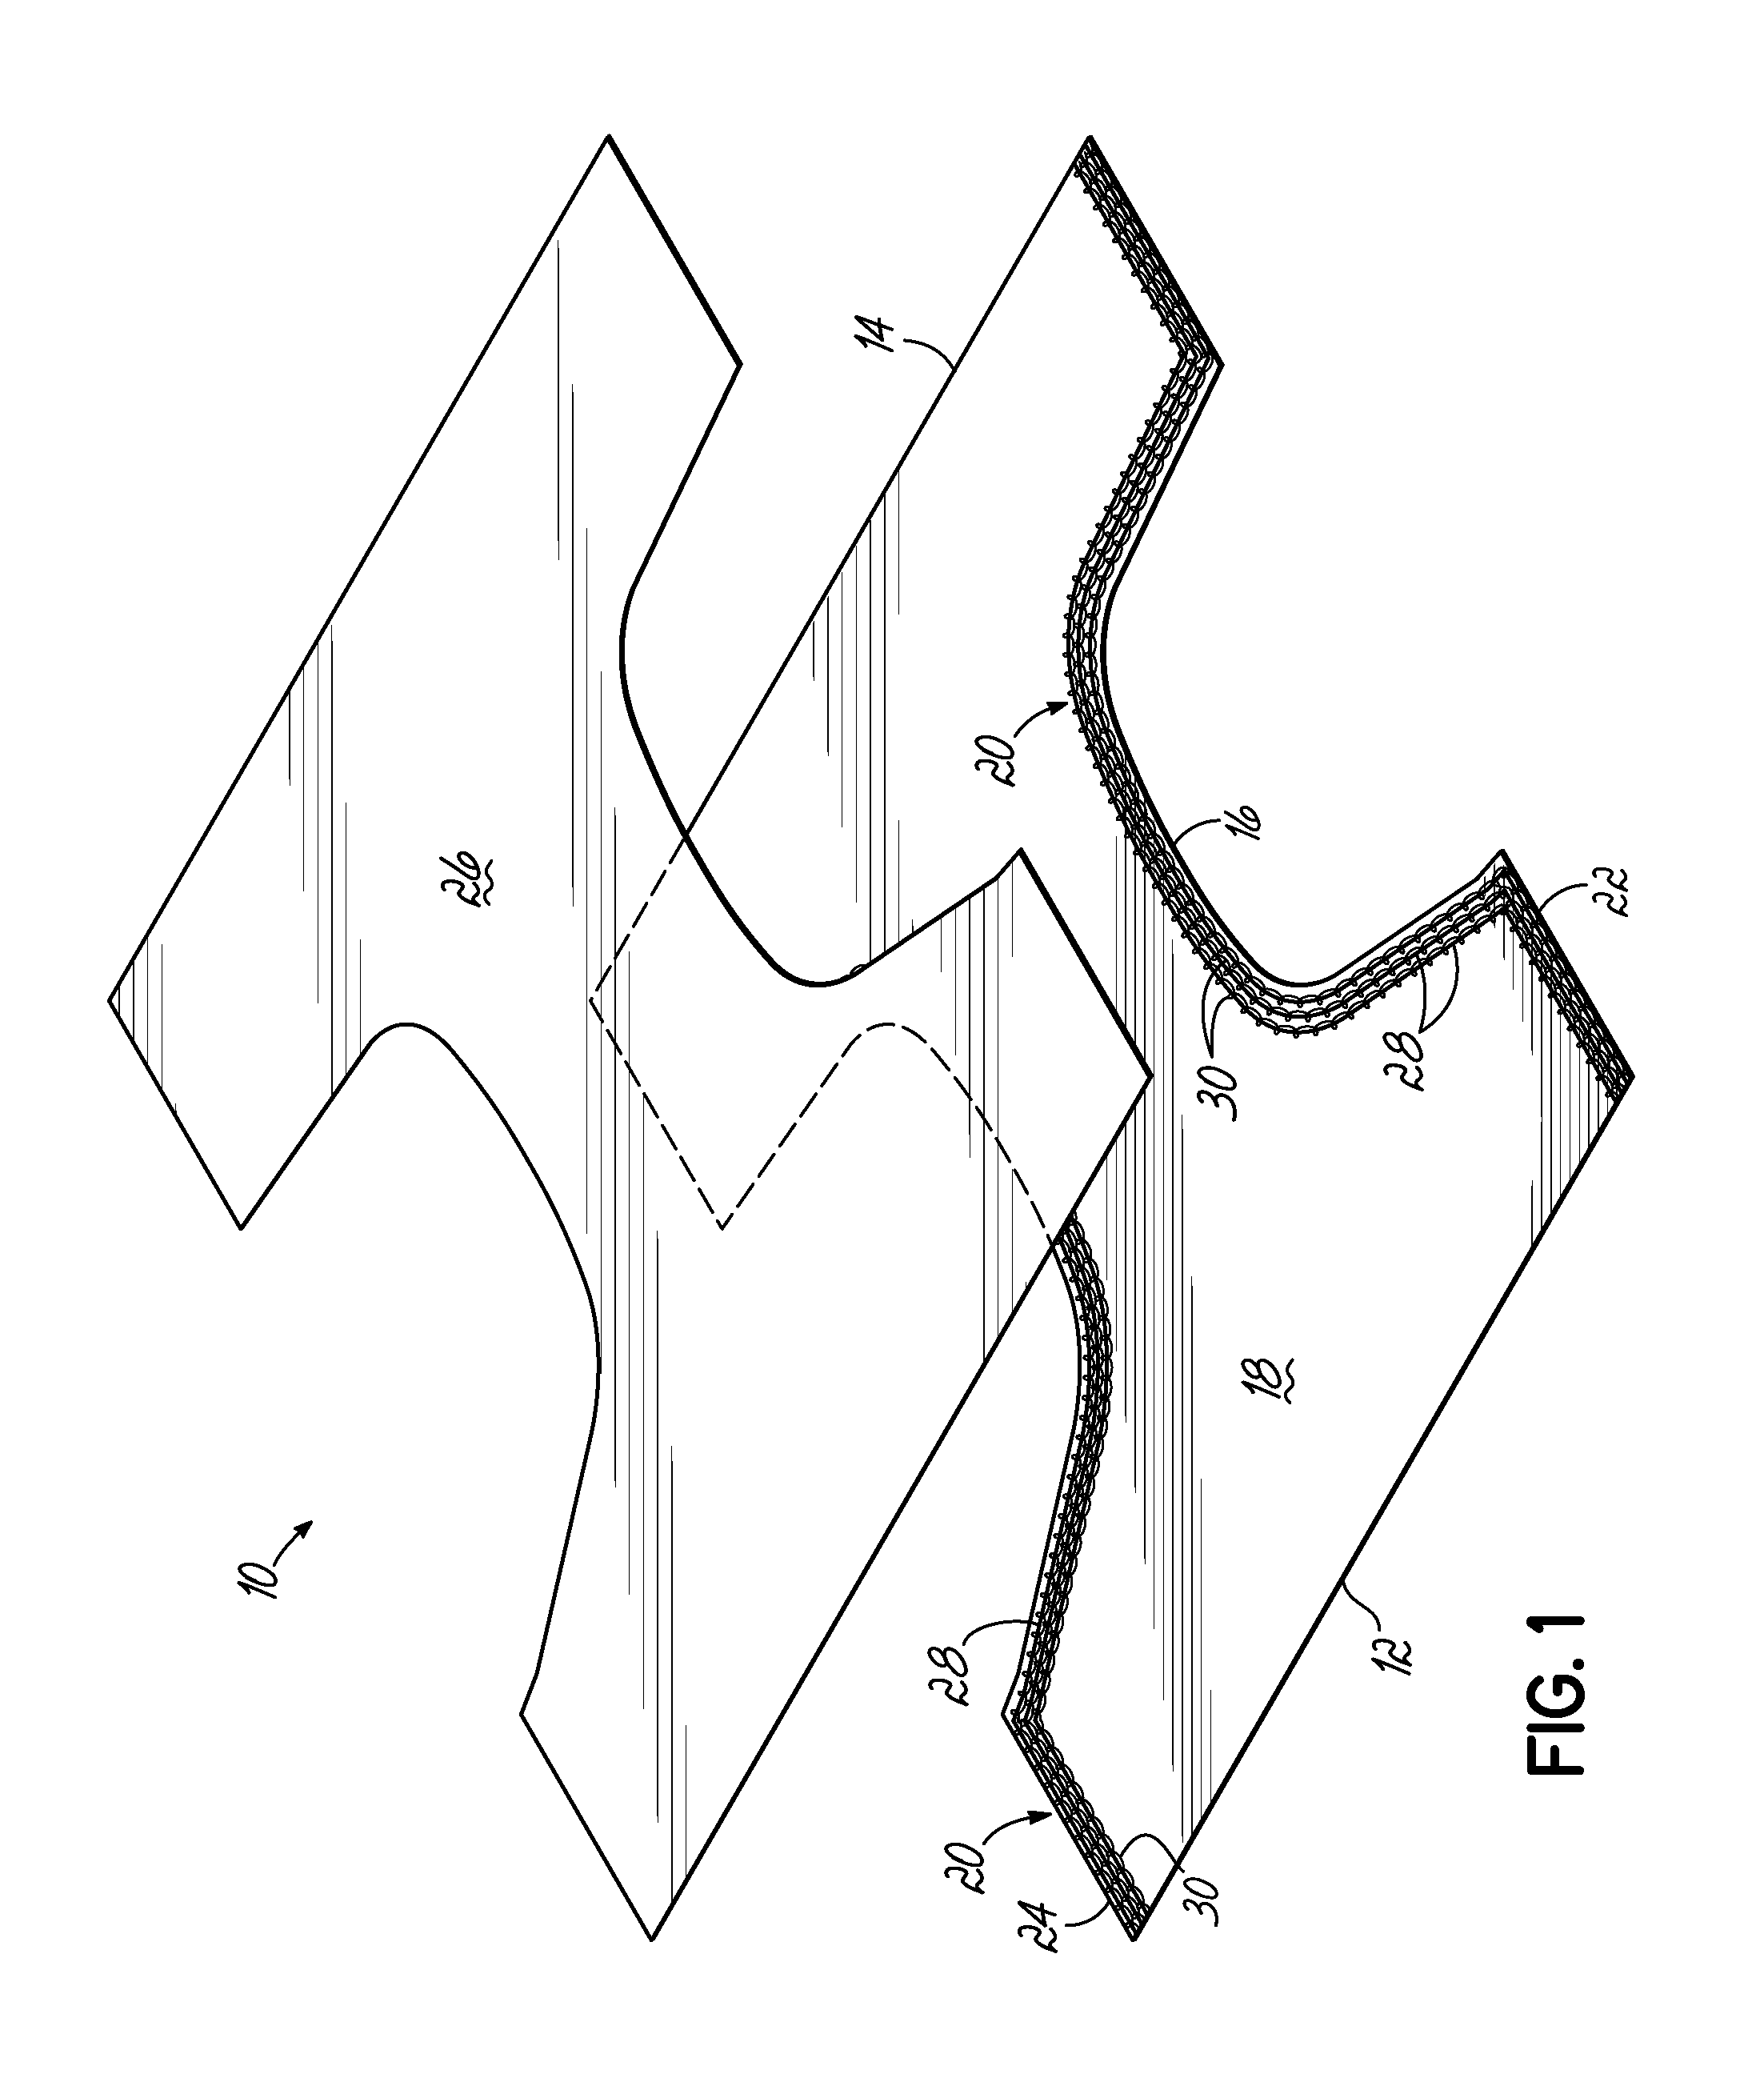 System and method for applying individually coated non-linear elastic strands to a substrate